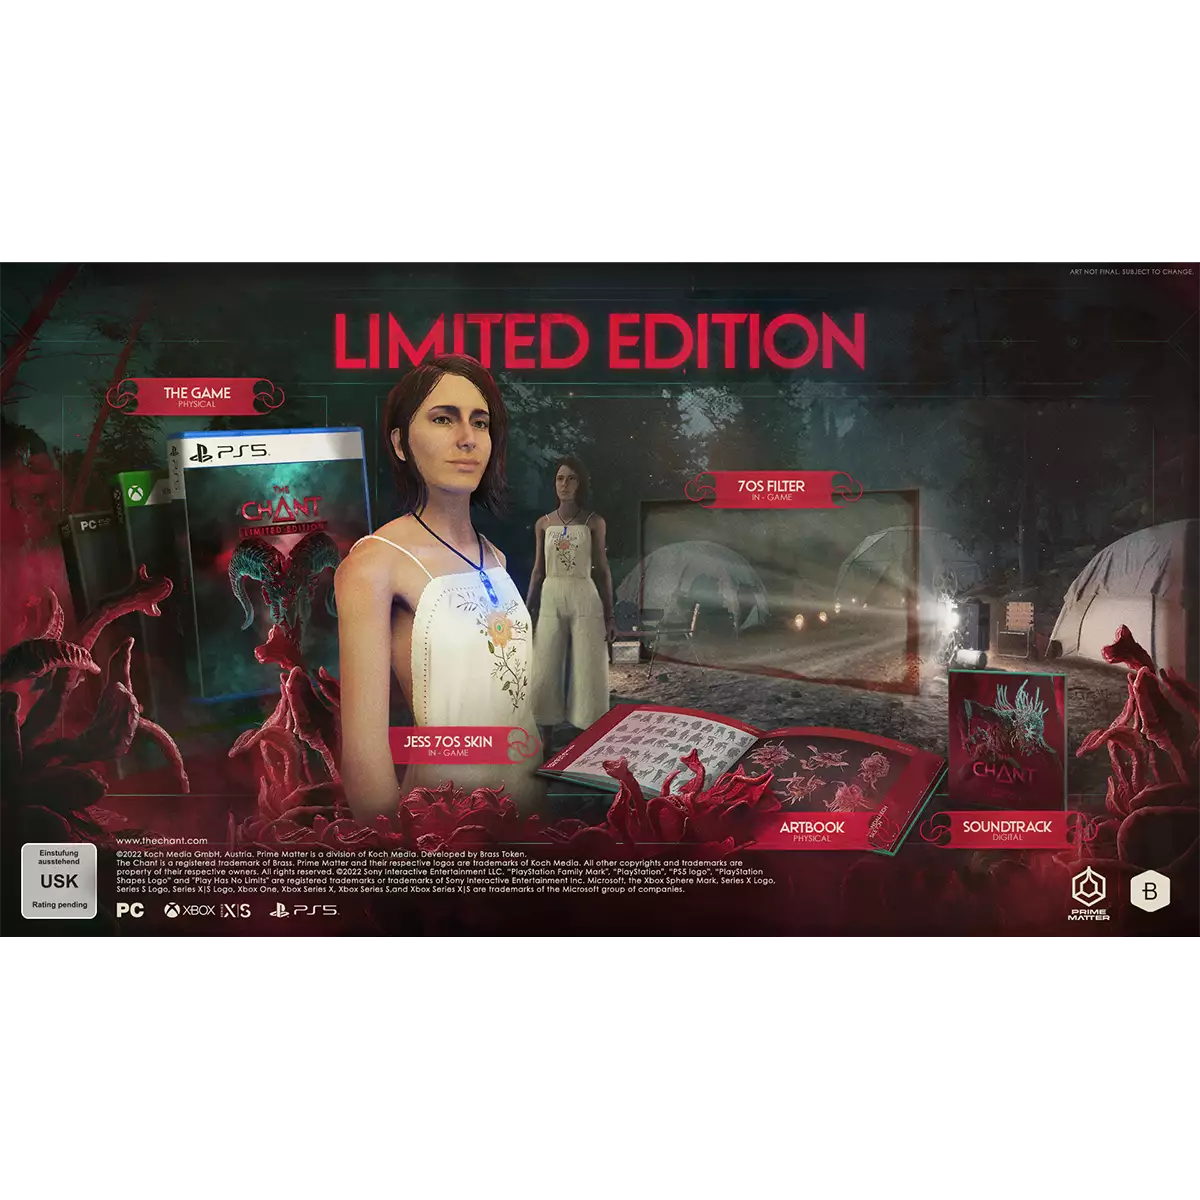 The Chant Limited Edition (PC) Image 3